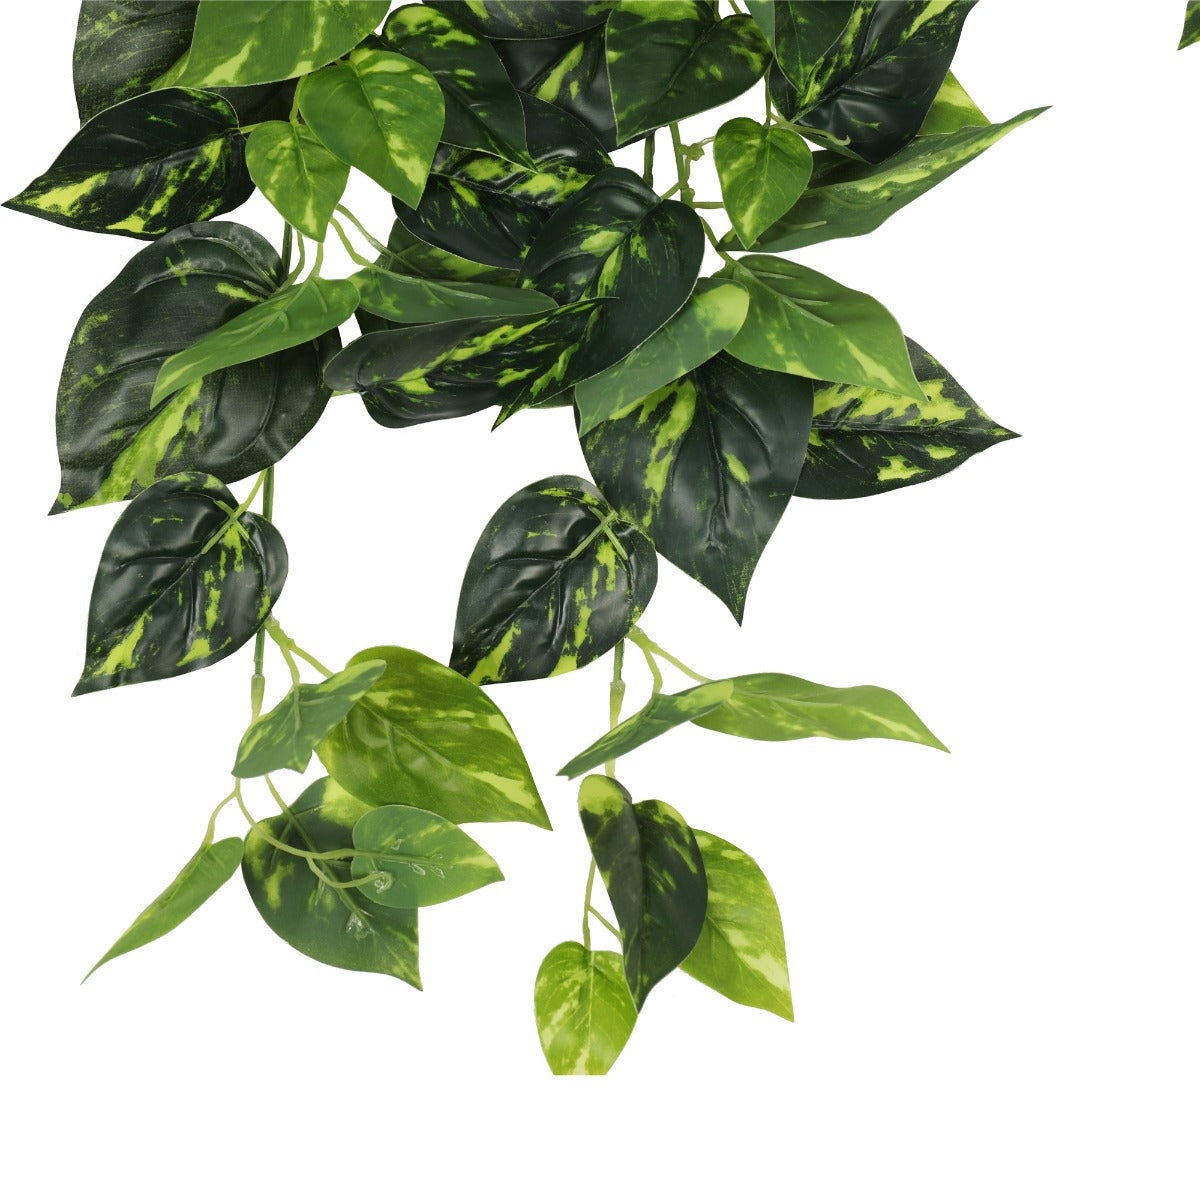 Heart Leaf Philodendron Hanging Creeper Bush 73cm - image5